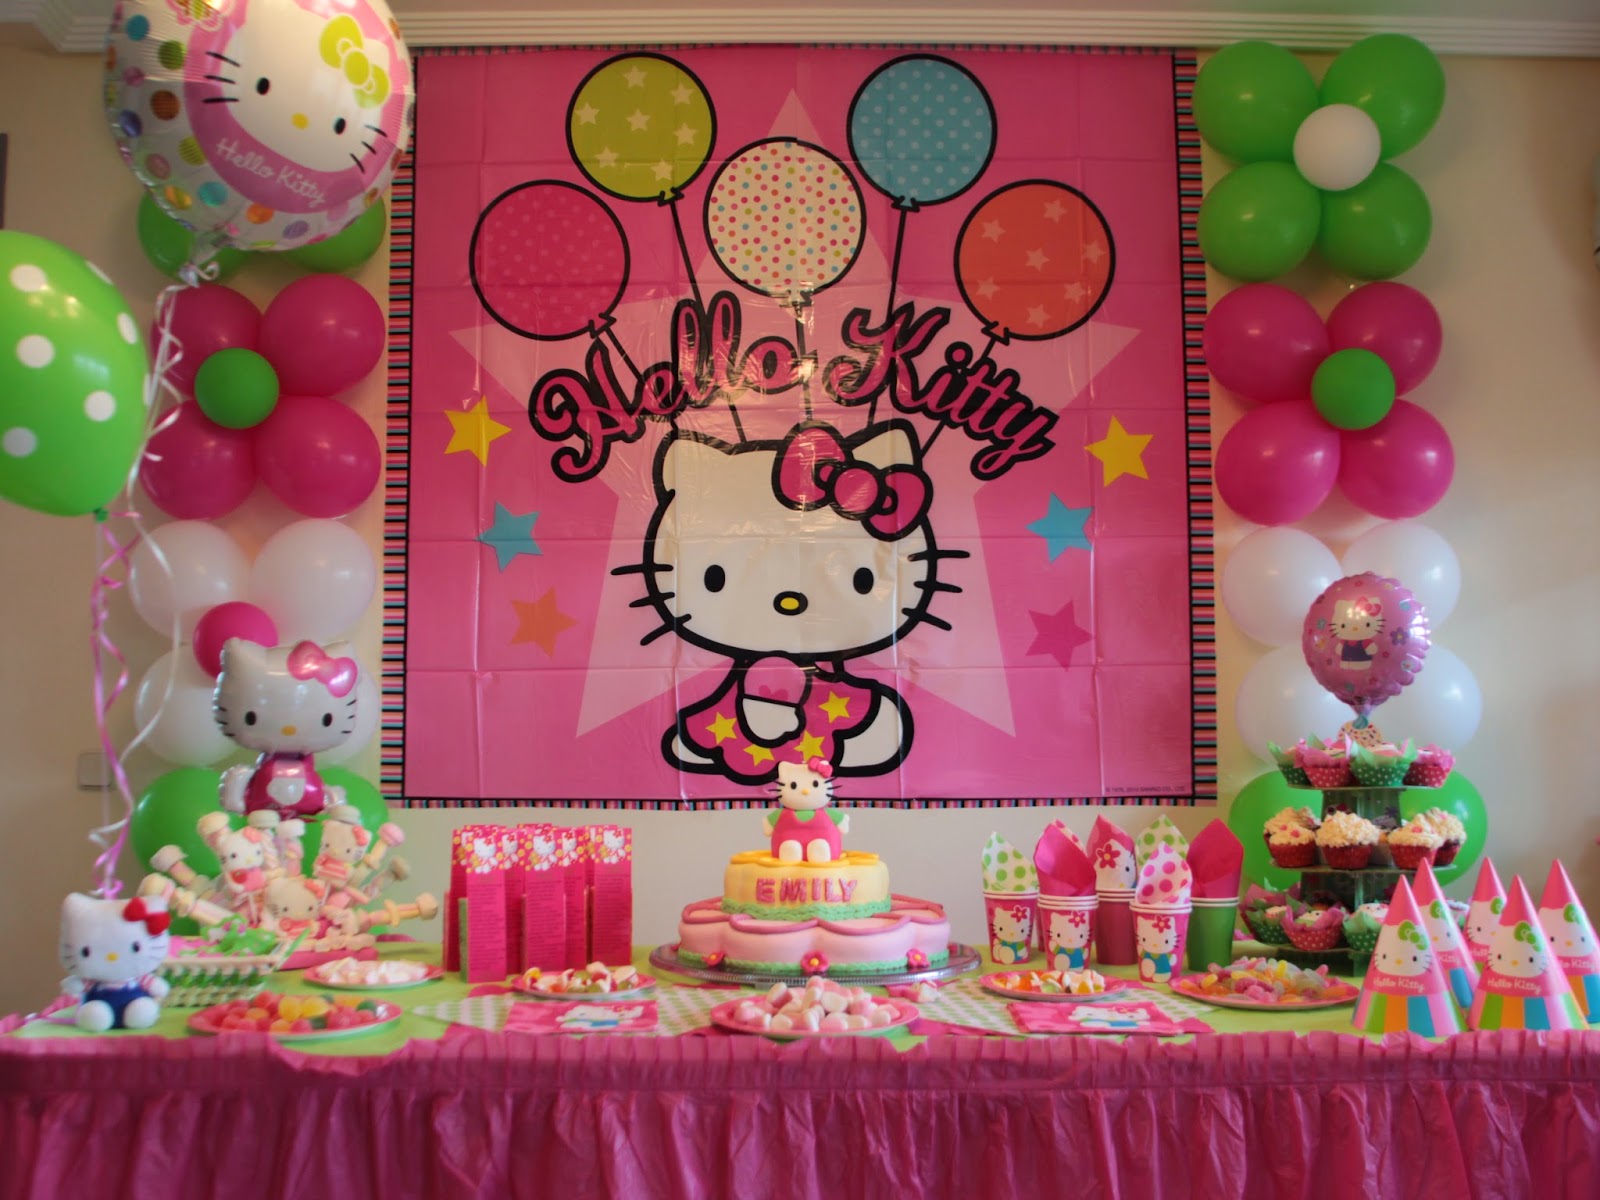 My Cupcakes Party Decoration for Hello Kitty Party